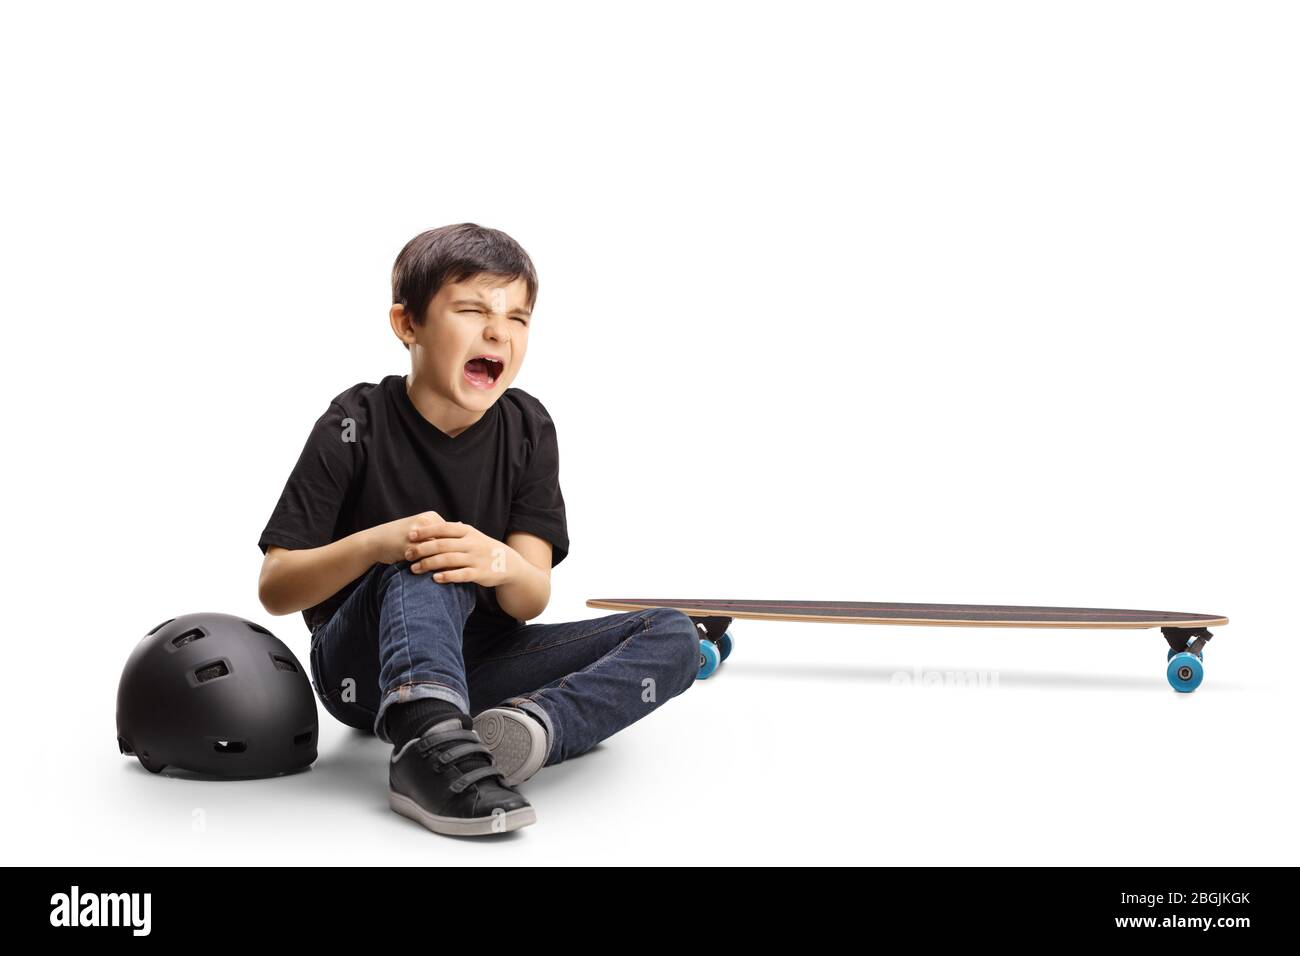 Child sitting on the floor crying and holding knee hurt from a skateboard isolated on white background Stock Photo